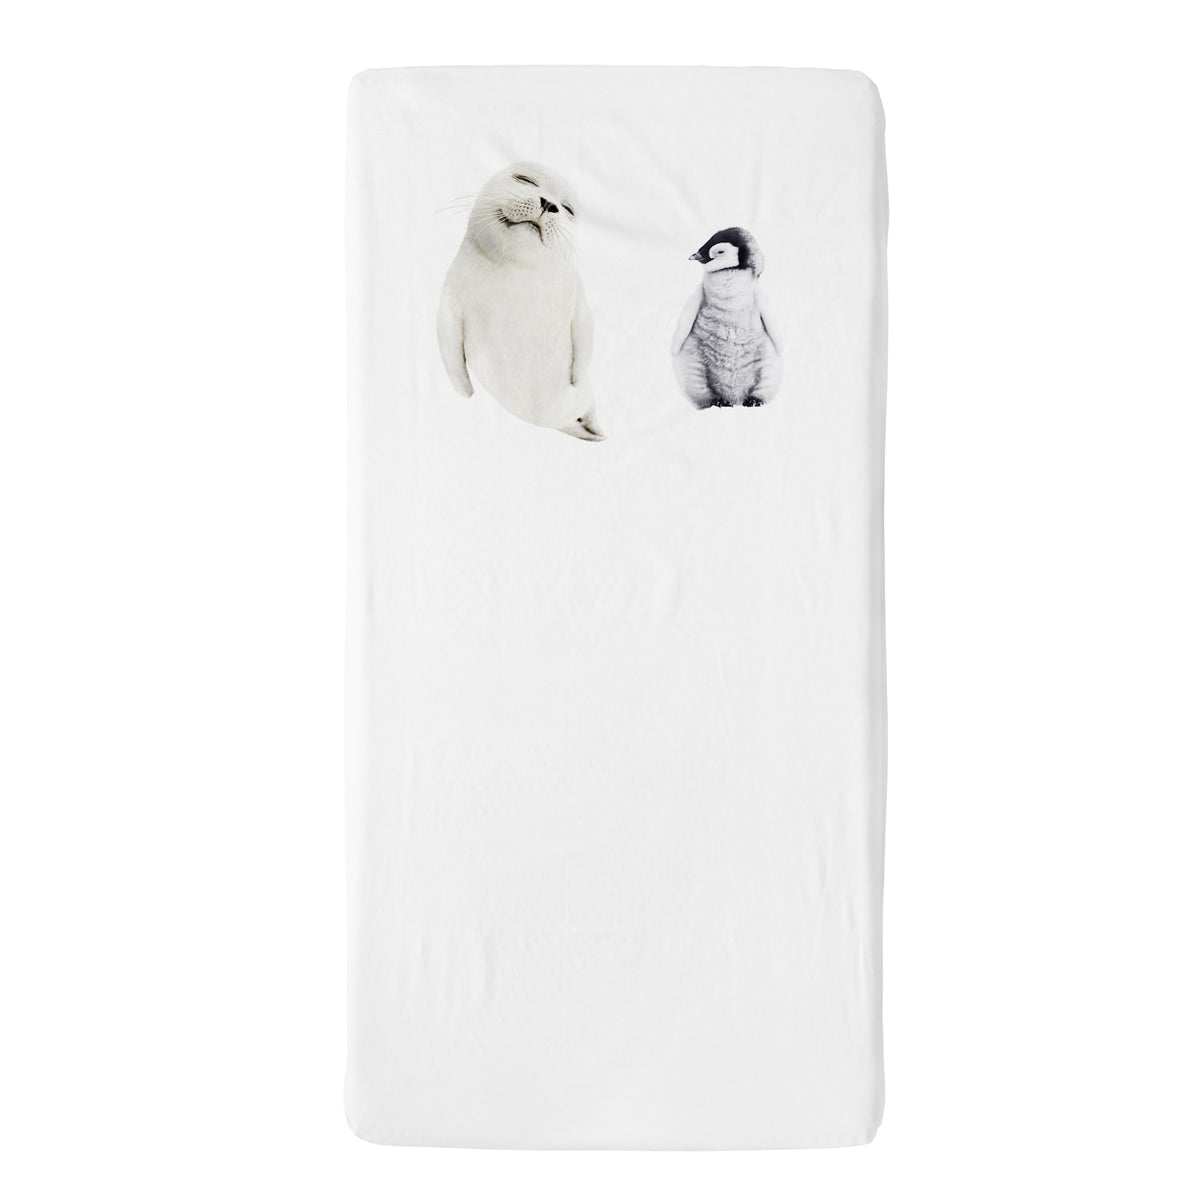 Deer Industries Baby Bedding, Cot sheets 60x120 and 70x140 cm. Snurk fitted cot sheet Arctic Friends.